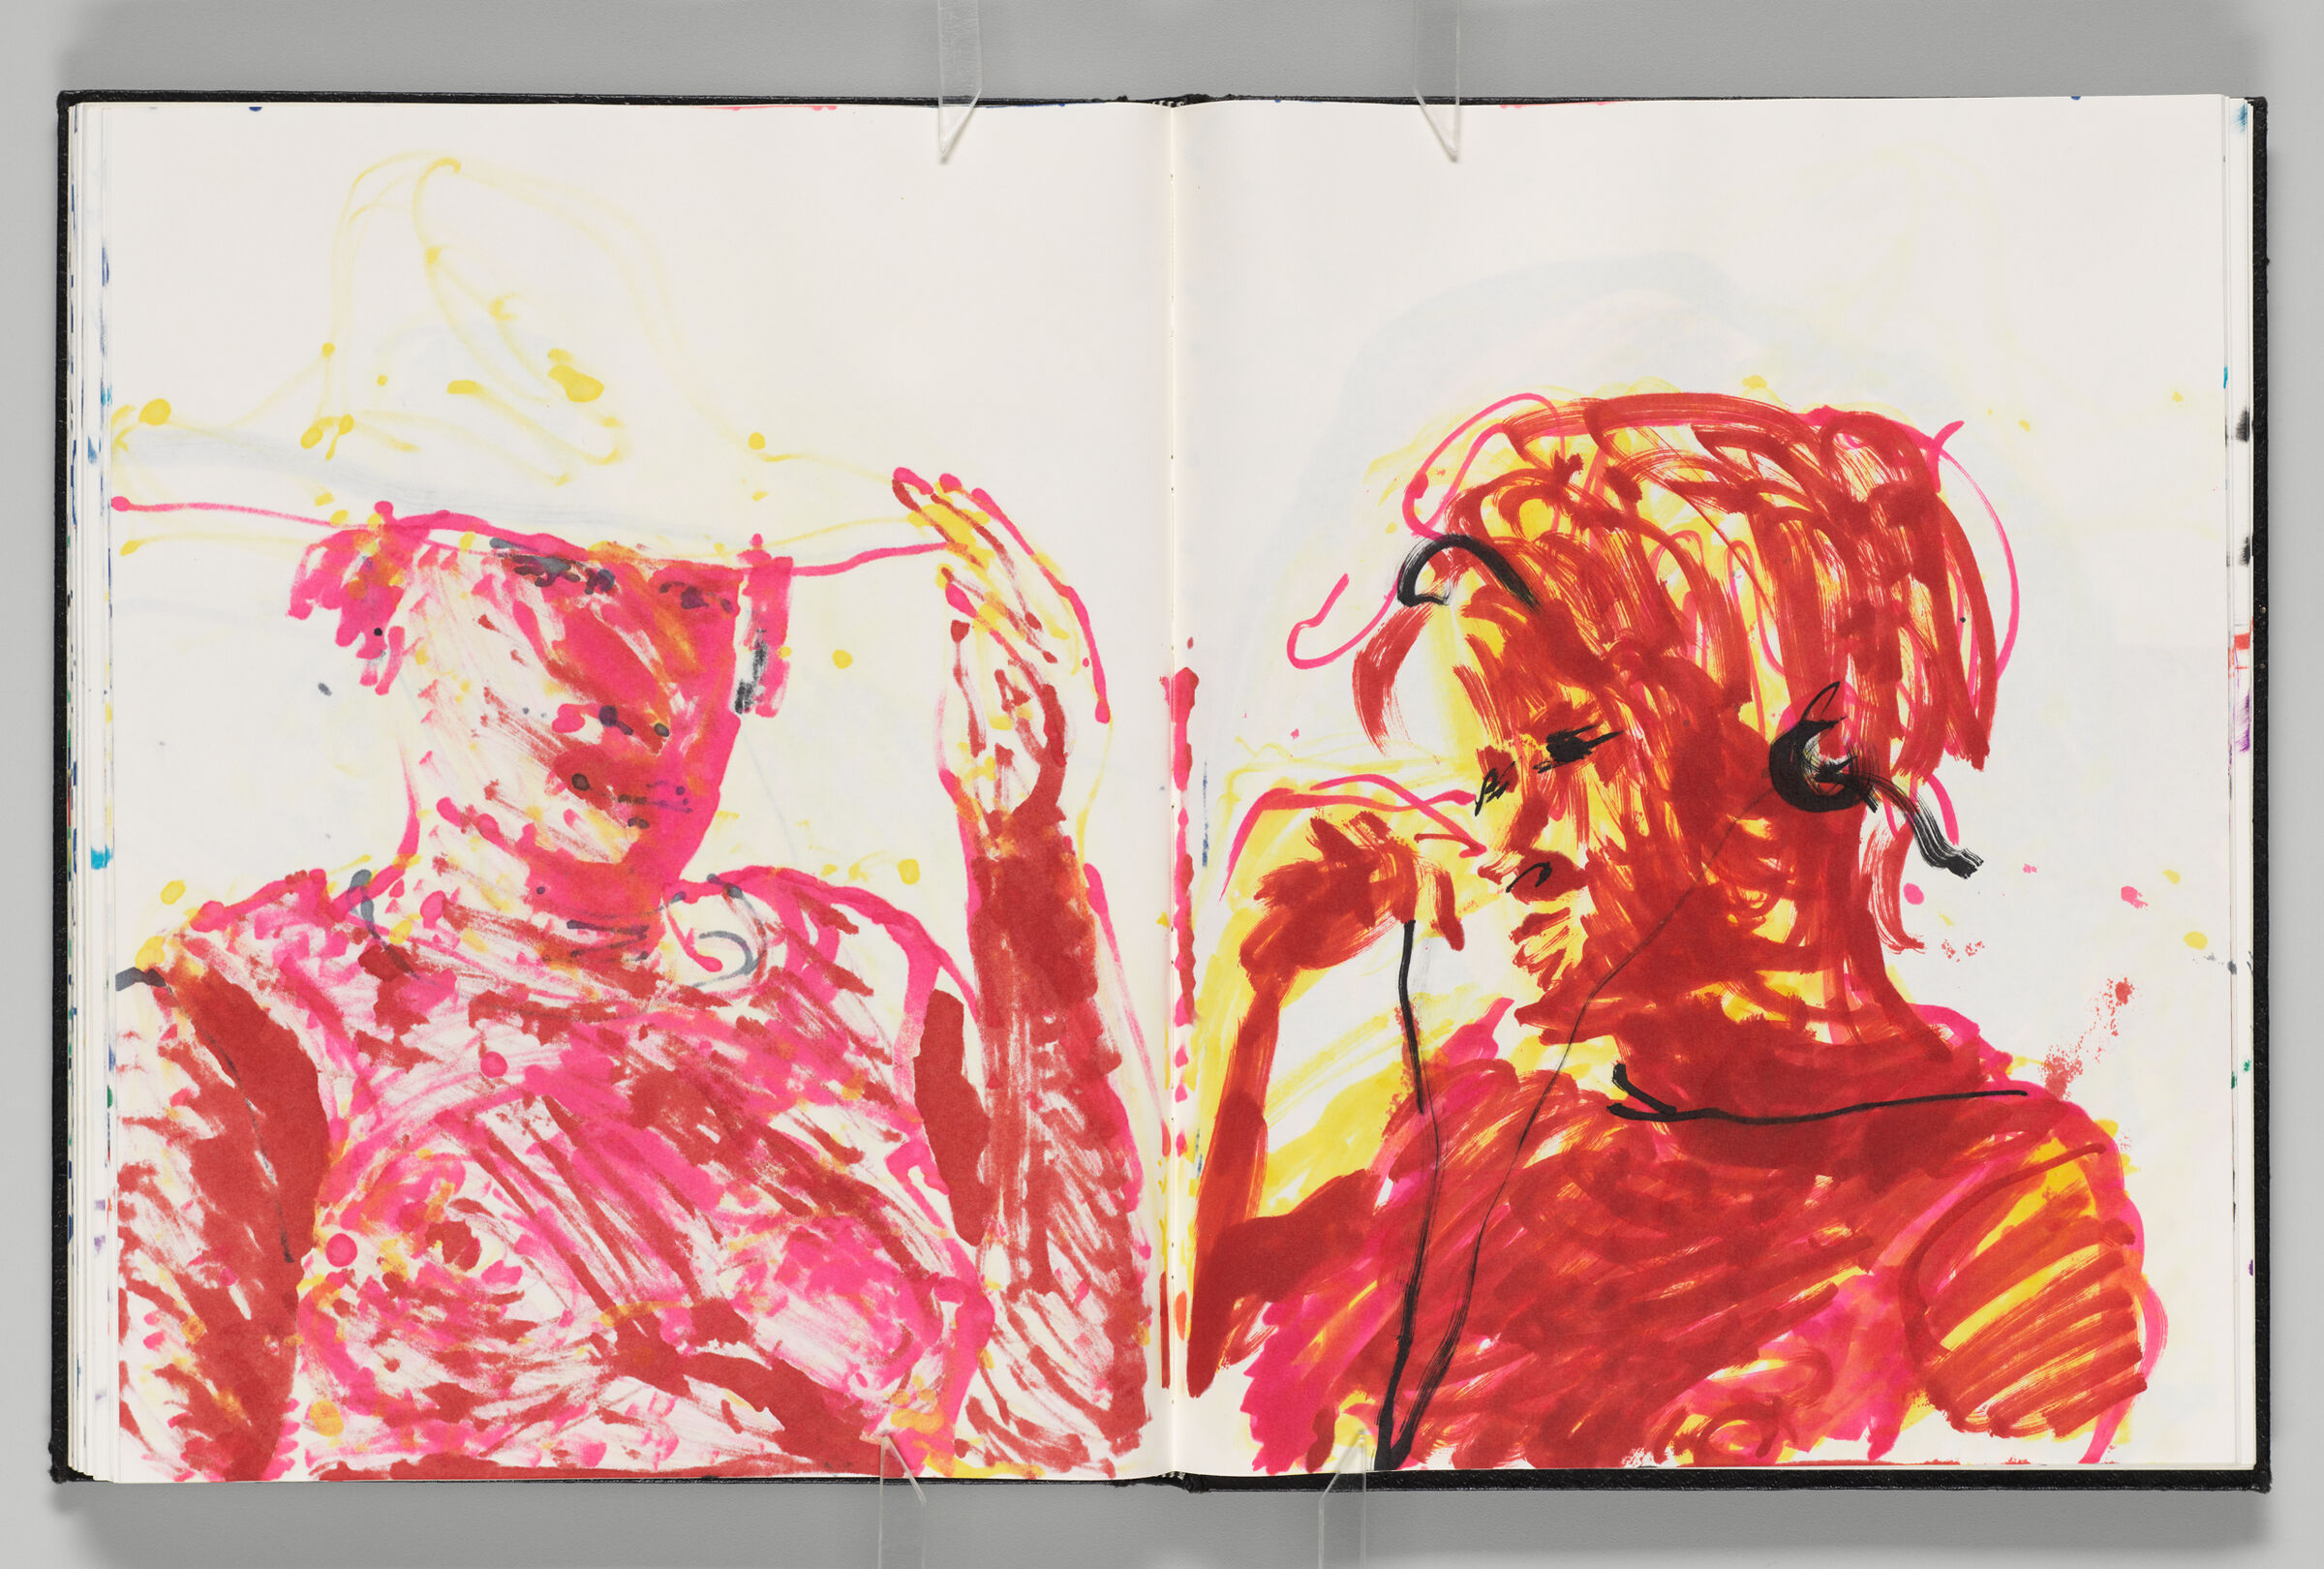 Untitled (Bleed-Through Of Previous Page, Left Page); Untitled (Frontal Portrait Of Female Figure With Headphones [Elizabeth], Right Page)